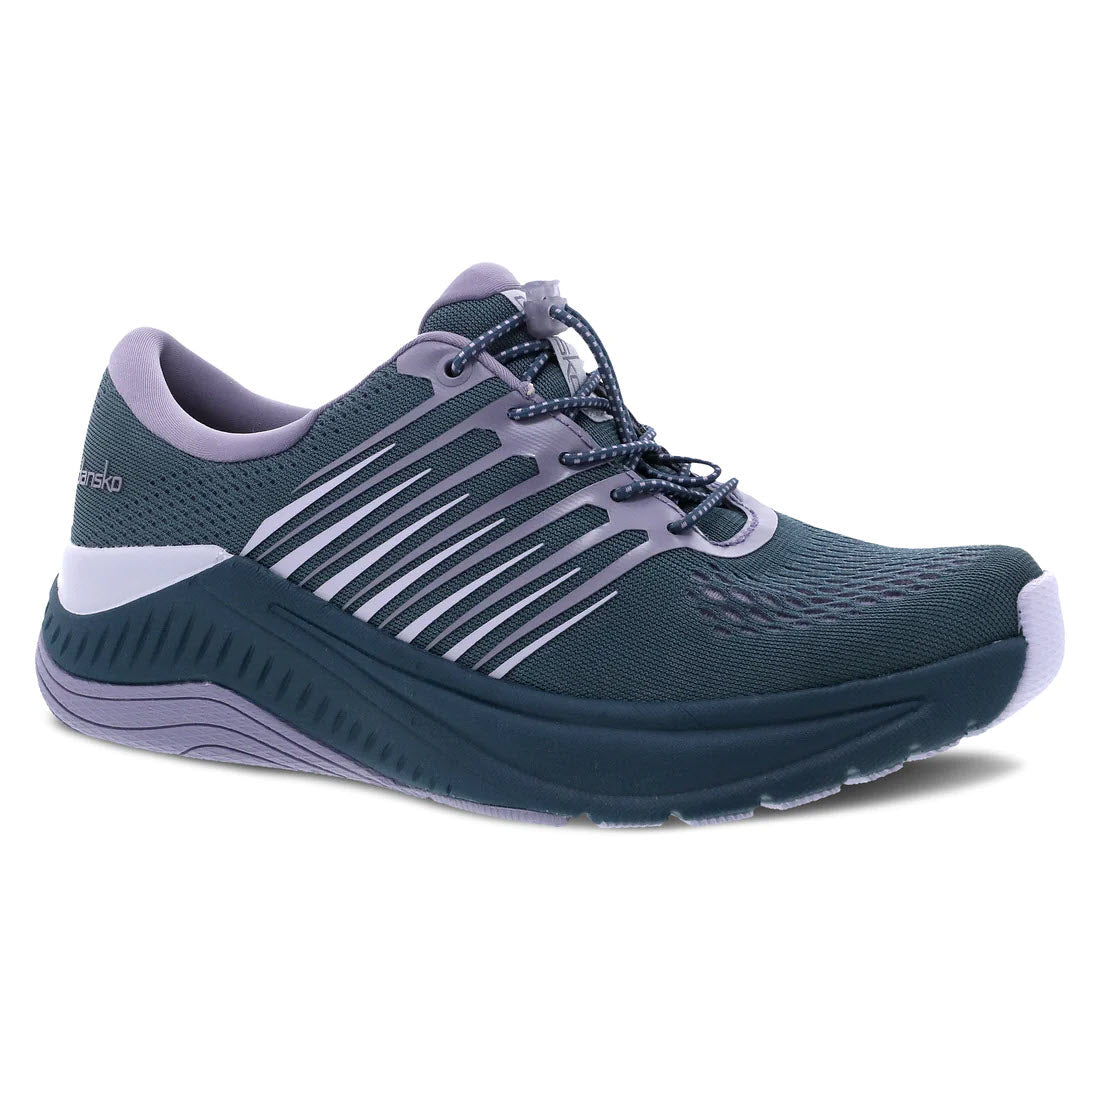 A single gray and purple Dansko Penni Denim Mesh - Women&#39;s performance walking sneaker with bungee lace, featuring a mesh upper and a thick, flexible sole.